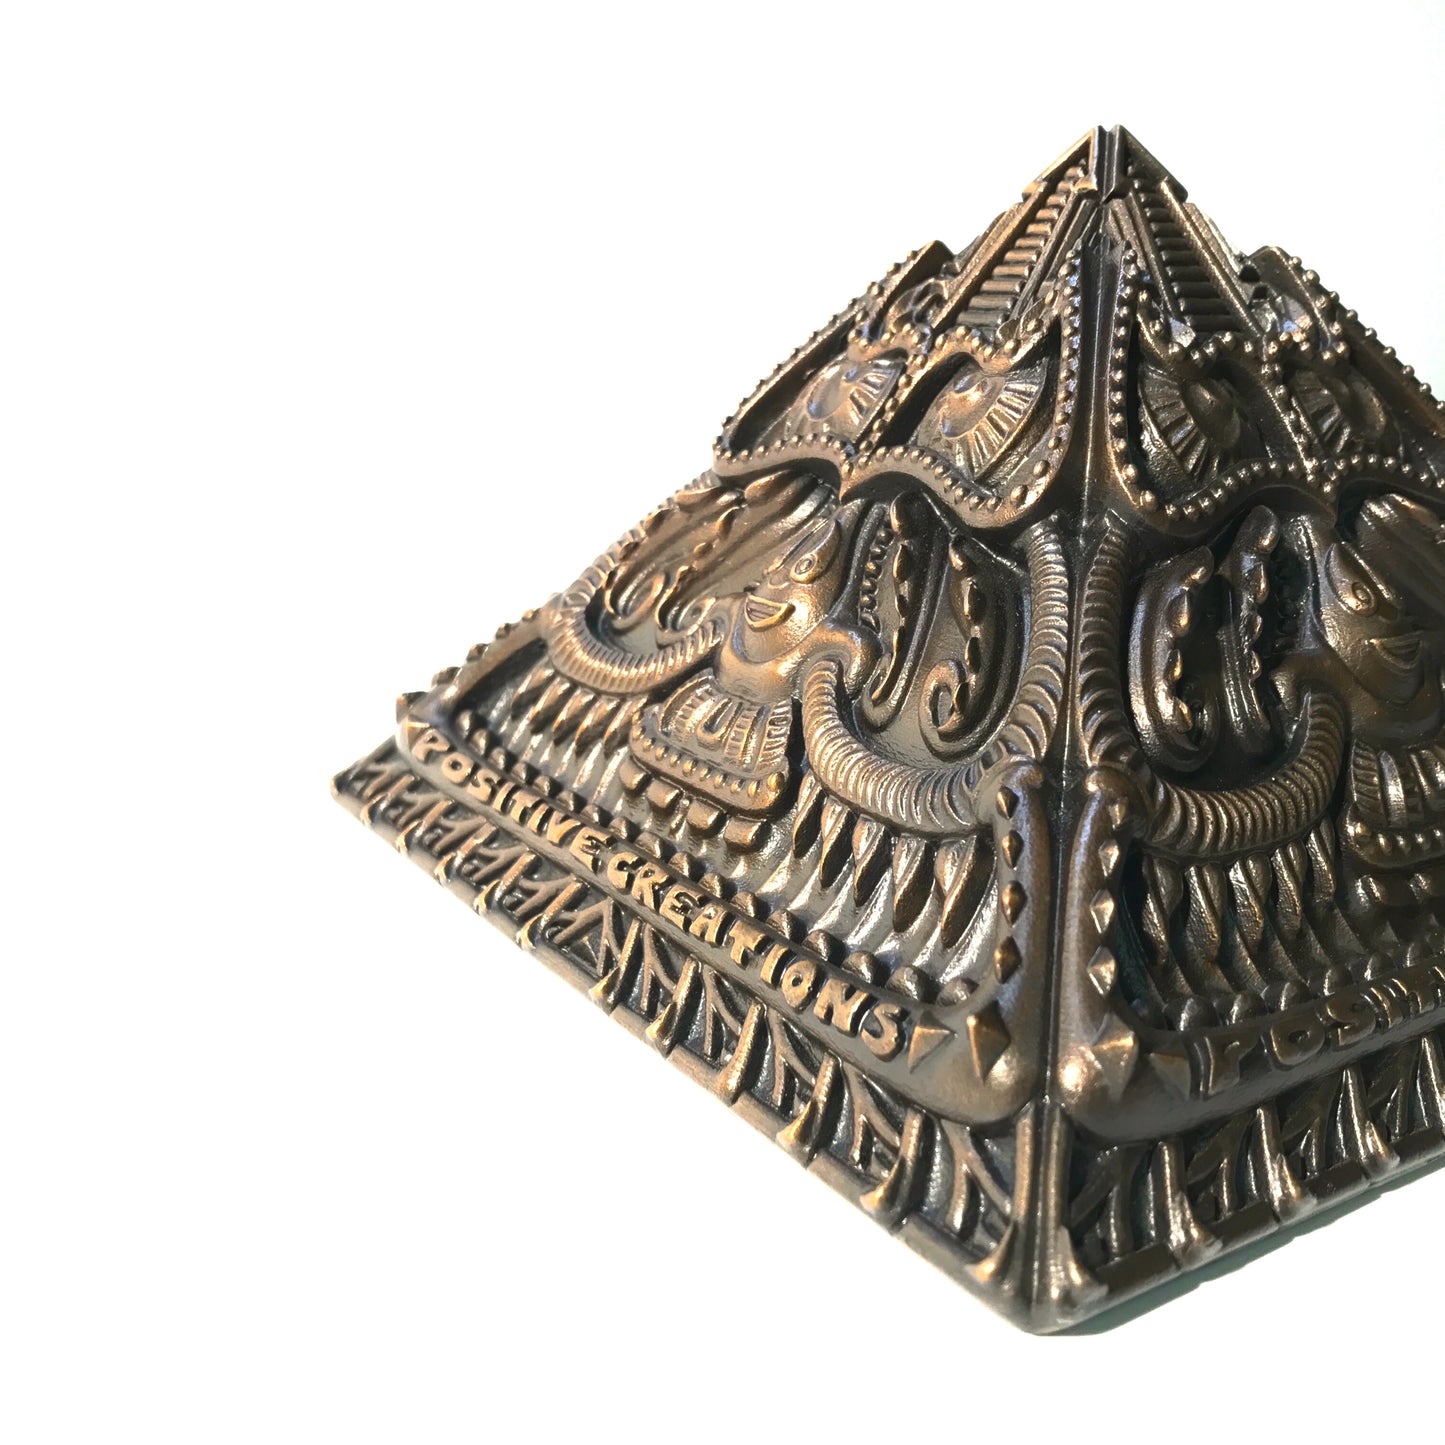 Limited Edition Bronze Pyramid Sculpture - Positive Creations